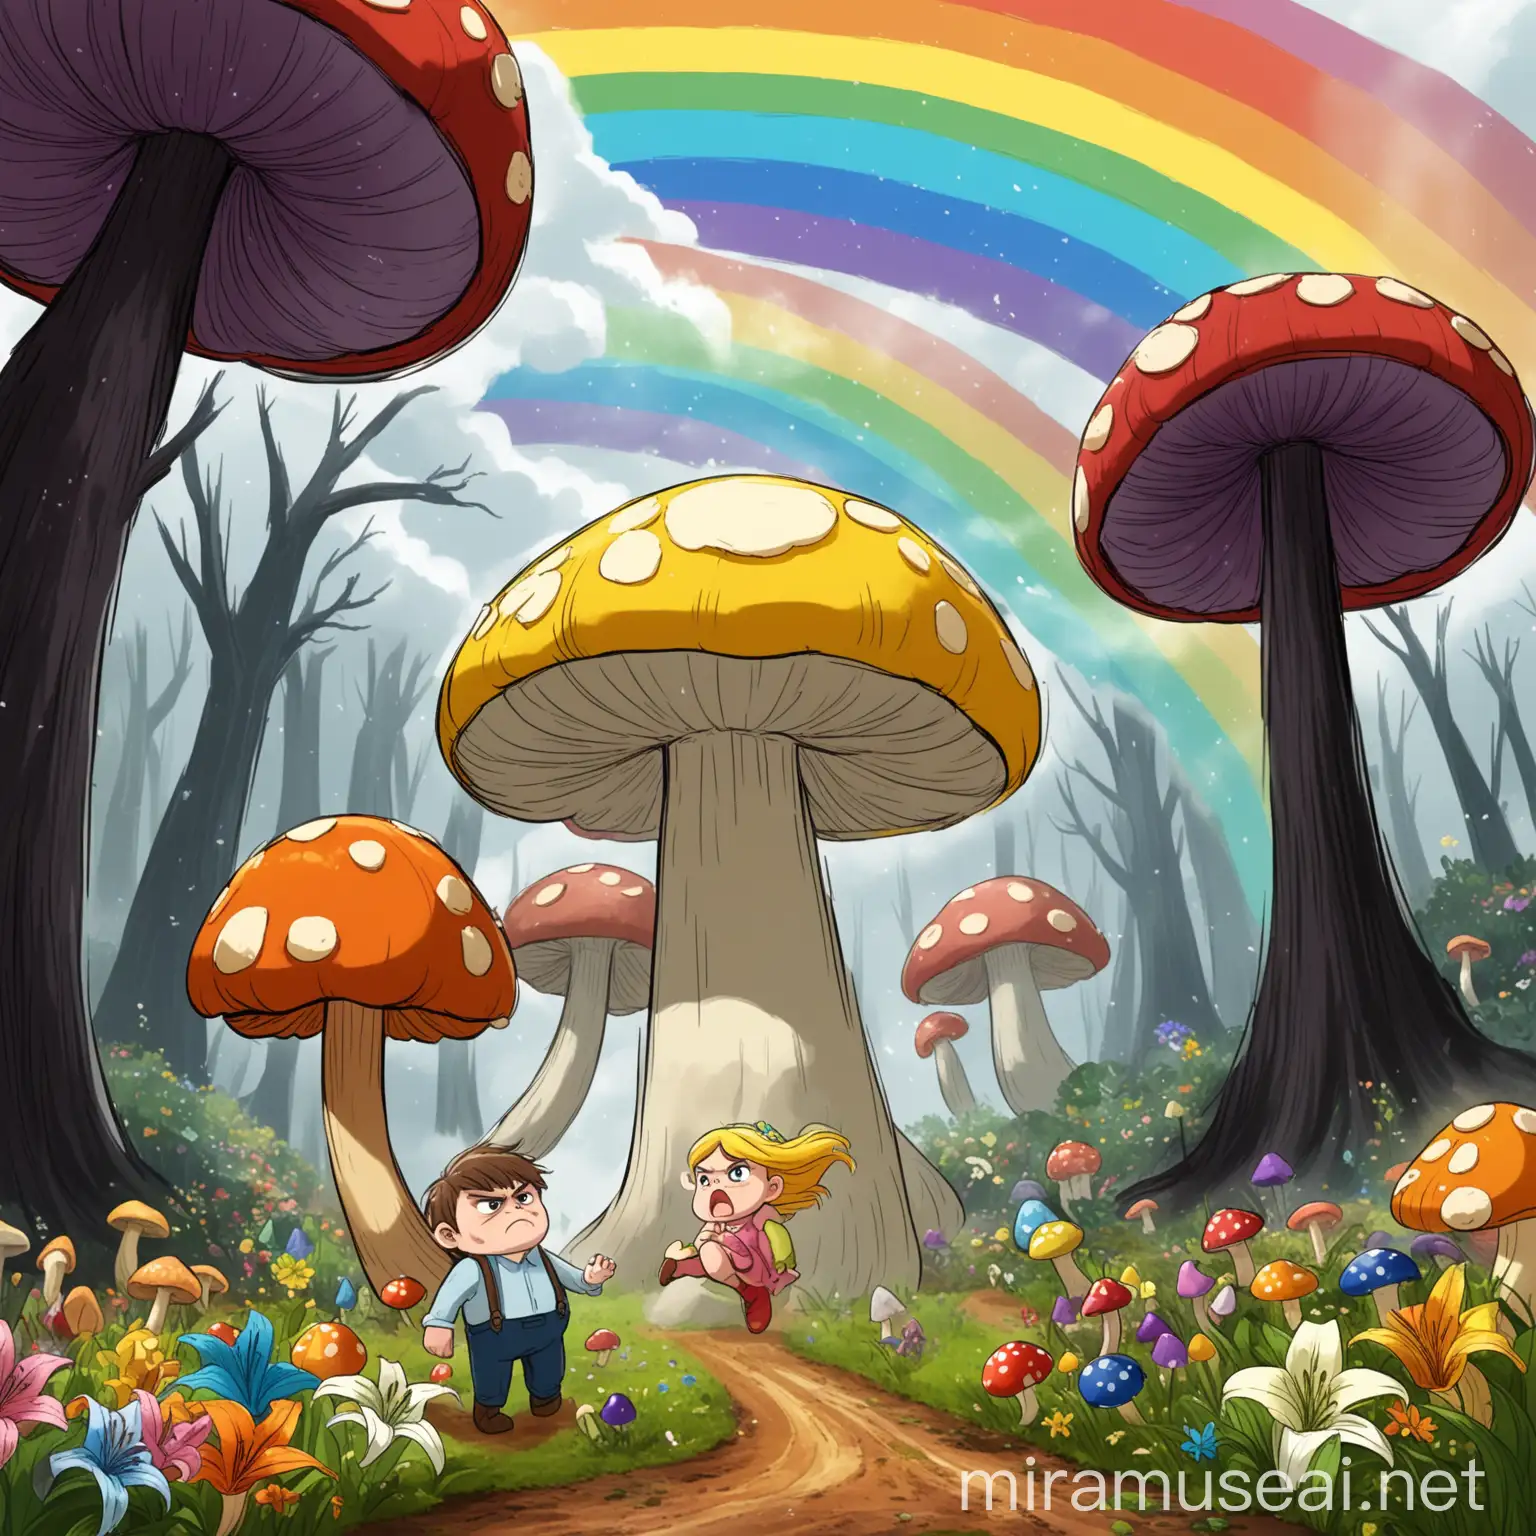 Lily and Arthur Emerged from a Rainbow into a Forest of Enormous Mushrooms